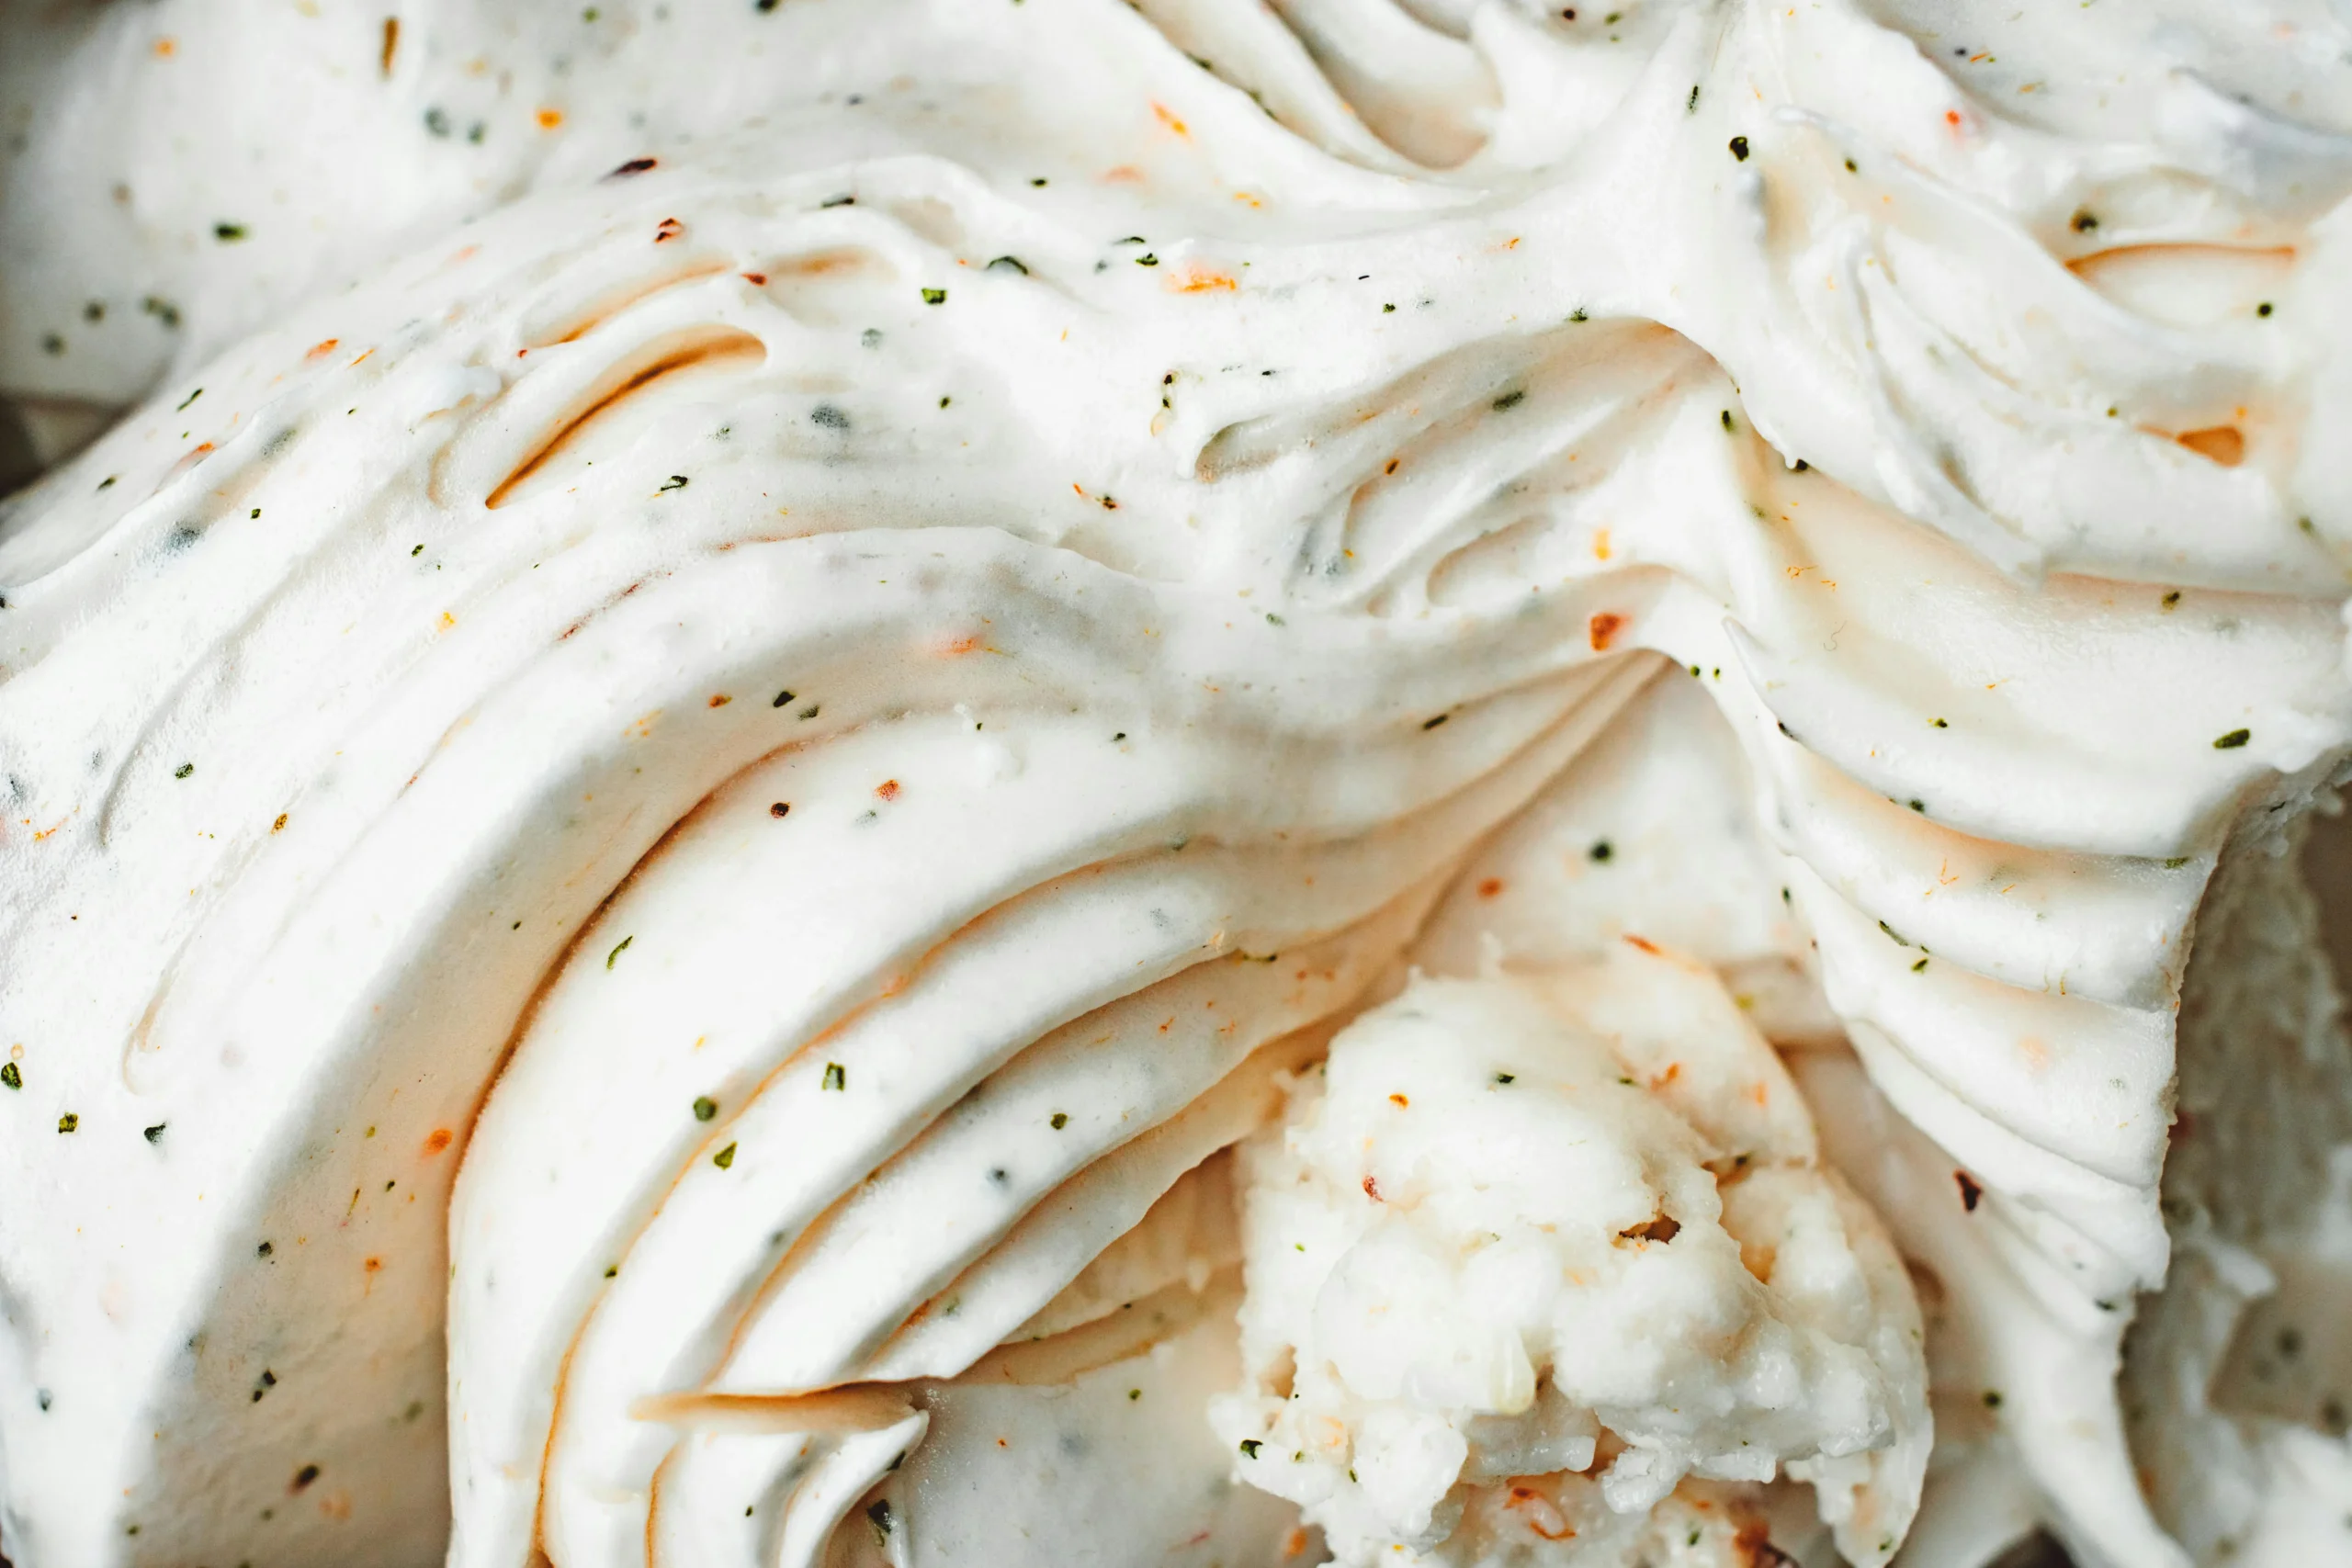 Close-up of a whipped cream swirl with specks of vanilla bean and orange zest, suggesting a rich and flavorful dessert topping.